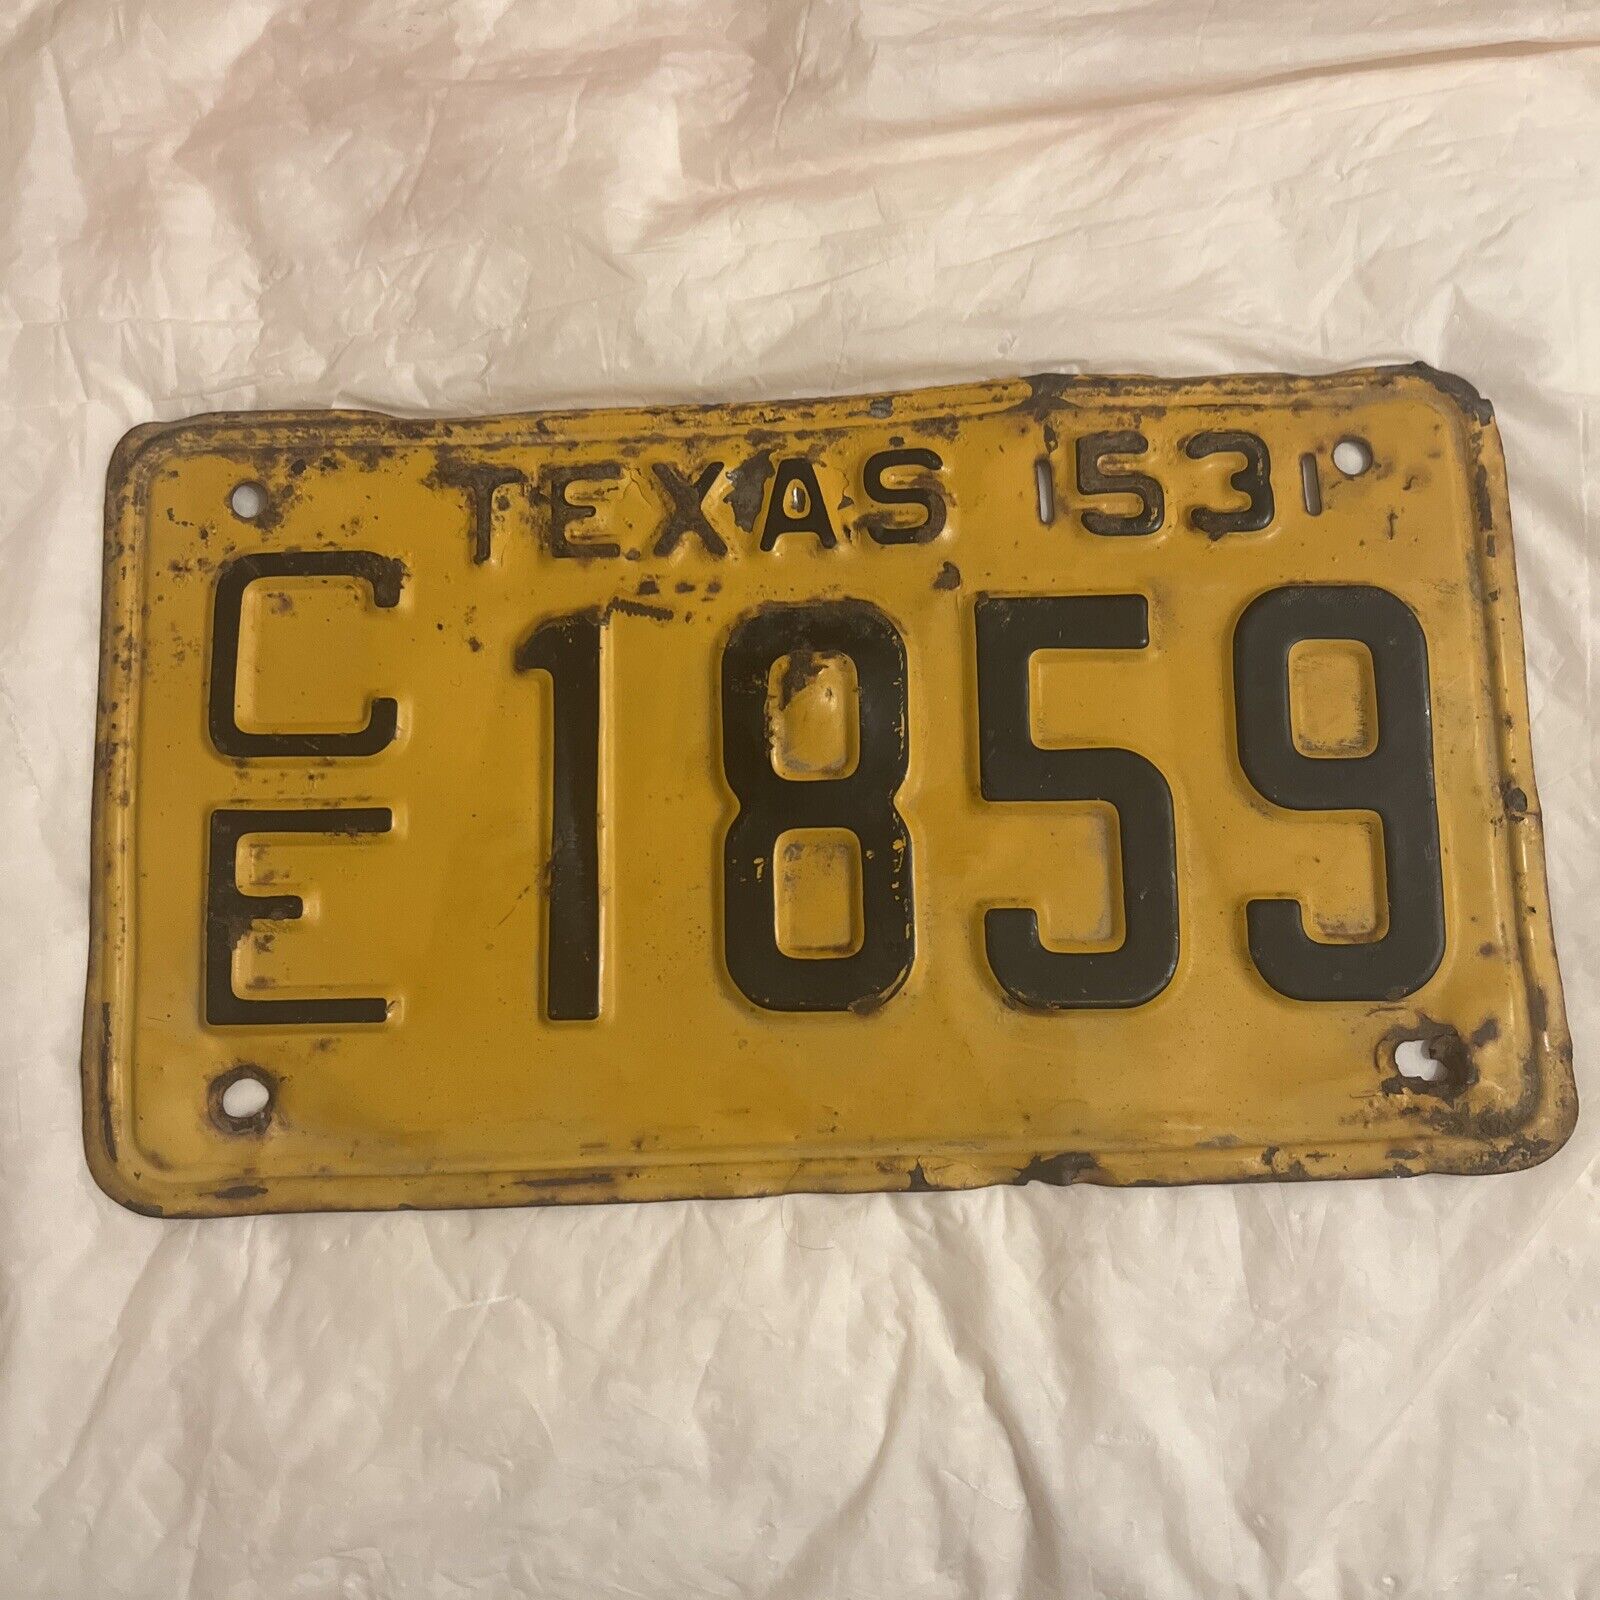 Vintage 1953 TEXAS license plate - Old Antique Auto Tag